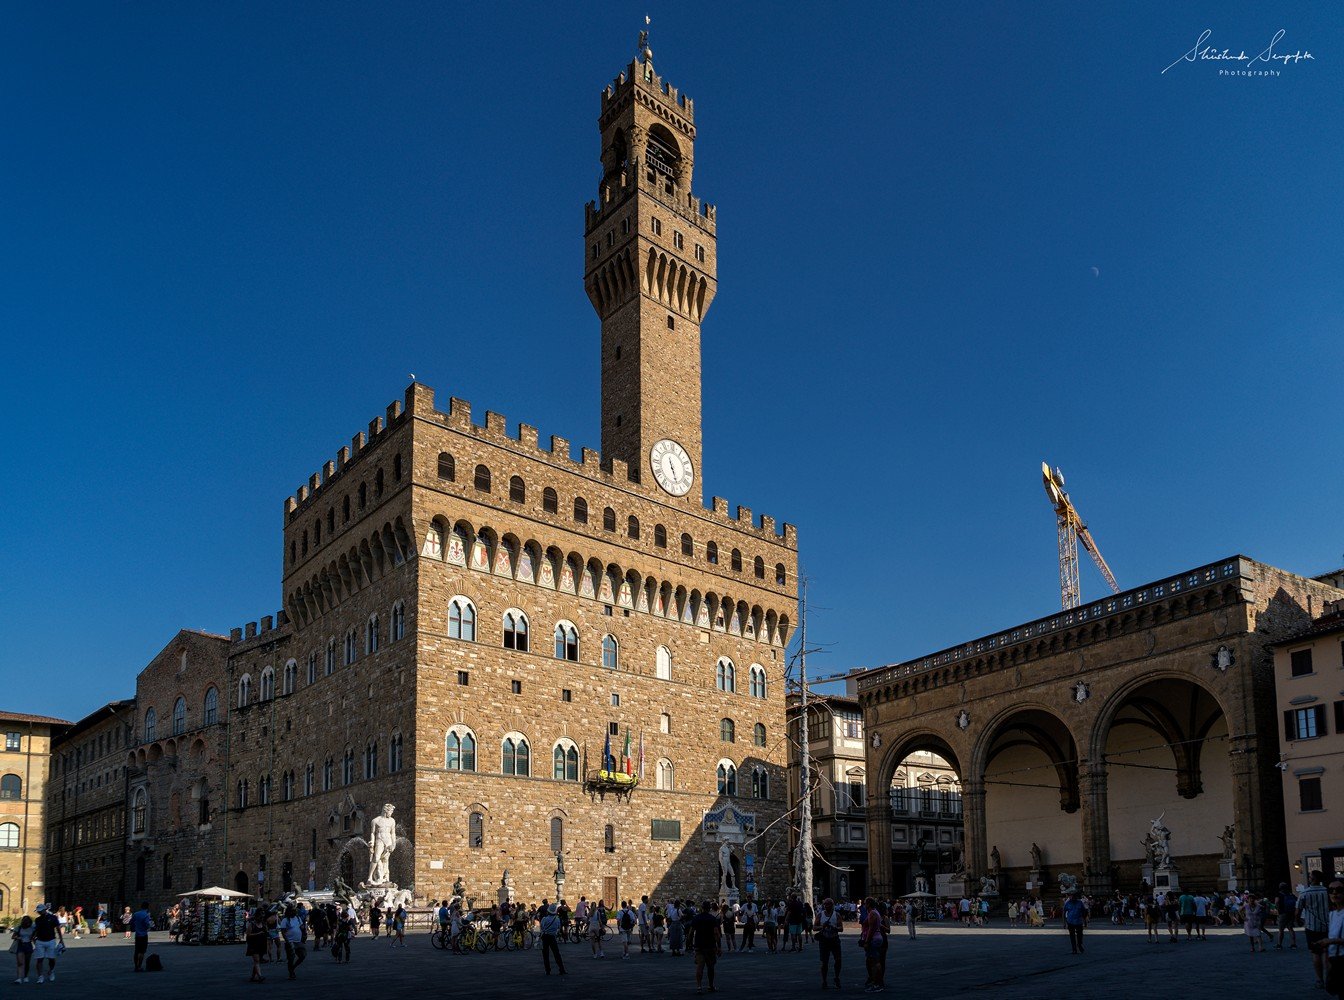 palazzo vecchio town hall situated on piazza del signoria in florence tuscany italy shot during summer